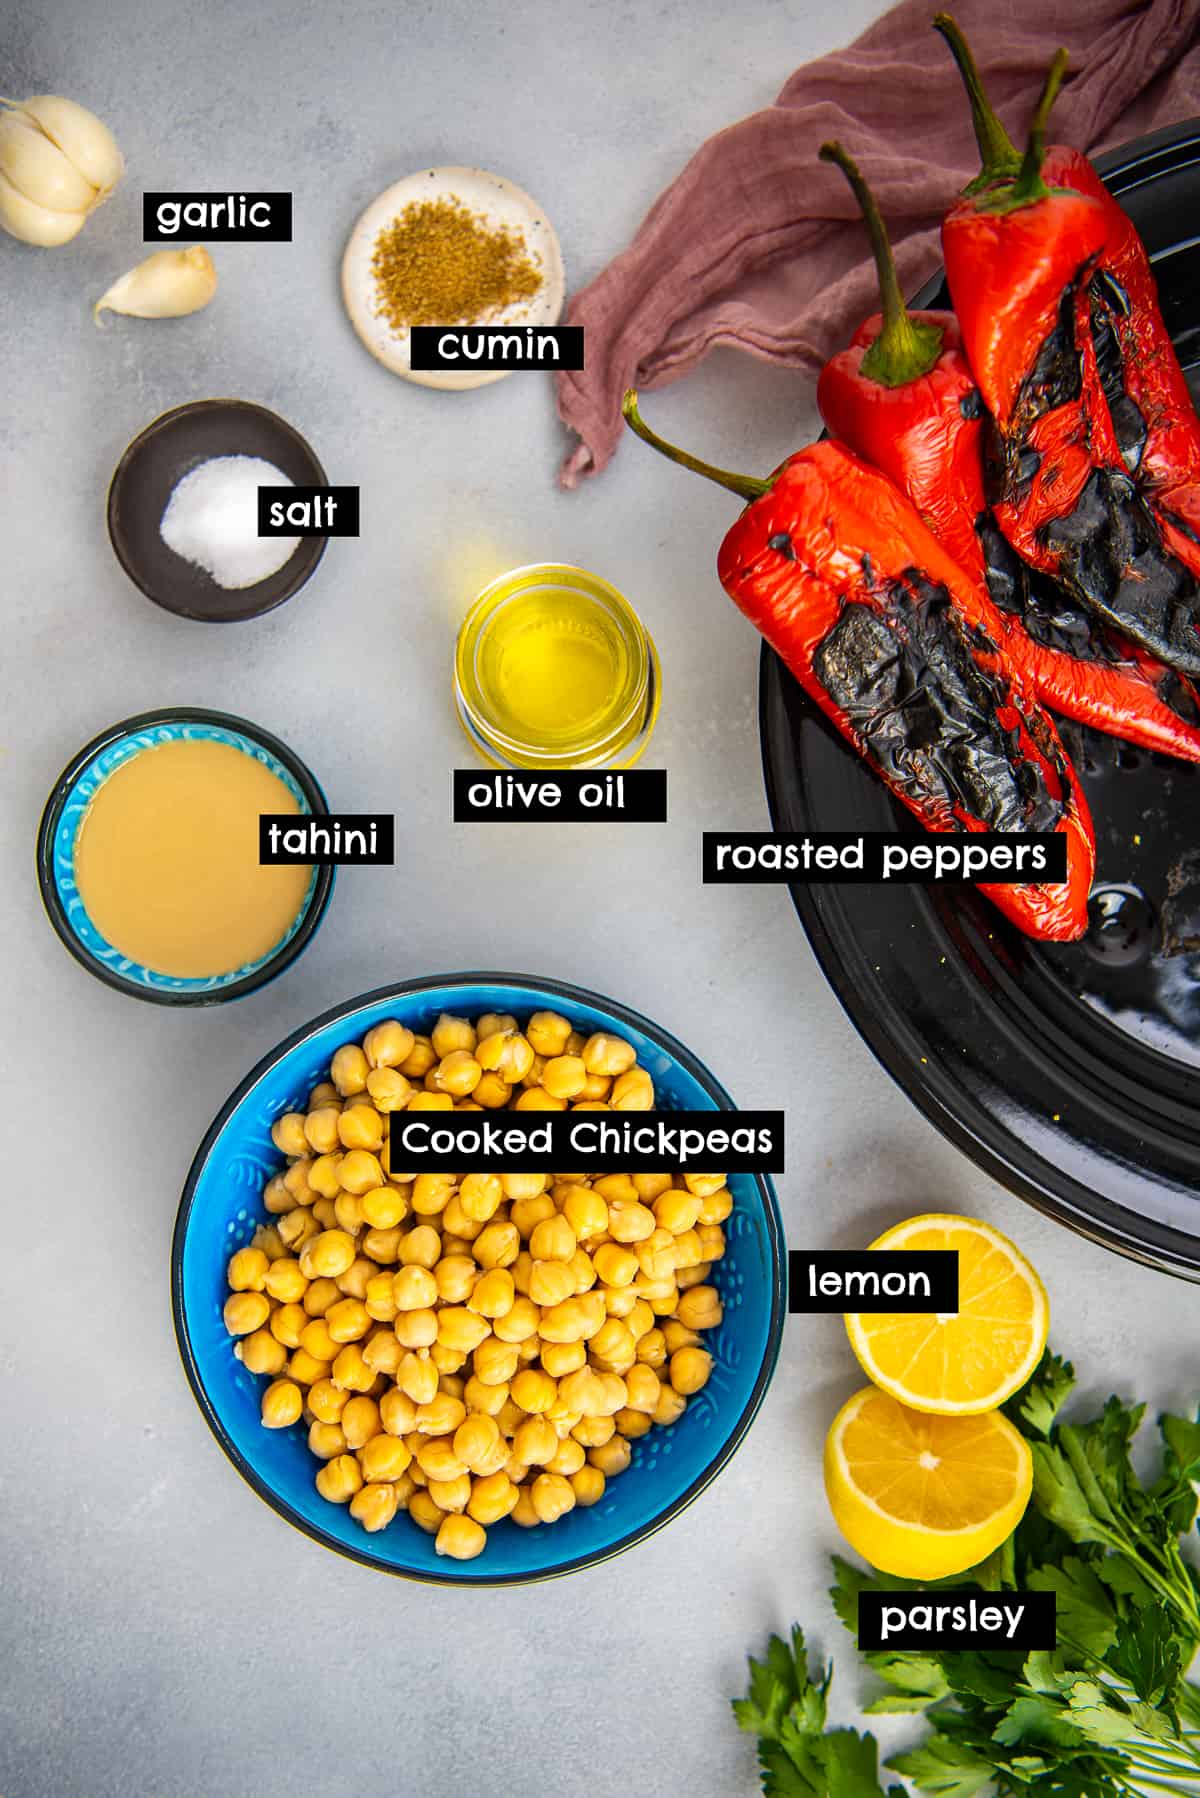 Roasted peppers, chickpeas, tahini, olive oil, lemon, parsley, garlic, salt and cumin photographed from top view.